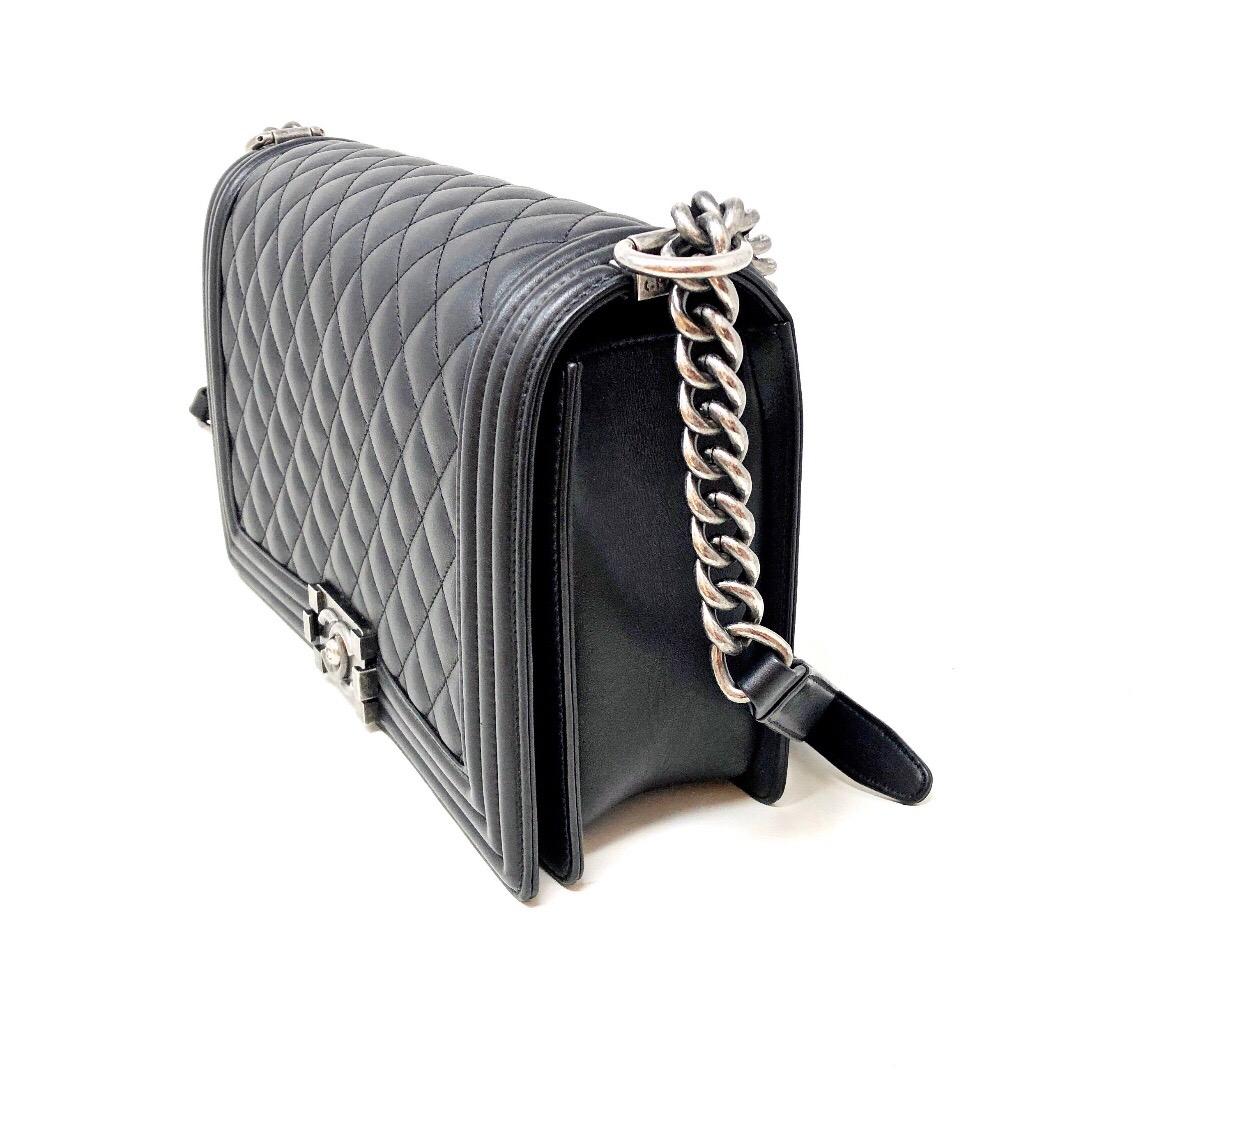 Chanel Boy Quilted Flap Bag Lambskin Medium, crafted from black quilted lambskin leather, features chain link strap with leather shoulder pad and aged silver-tone hardware. Year 2018 dust- bag card, box and original envoice included. 
Dimensions